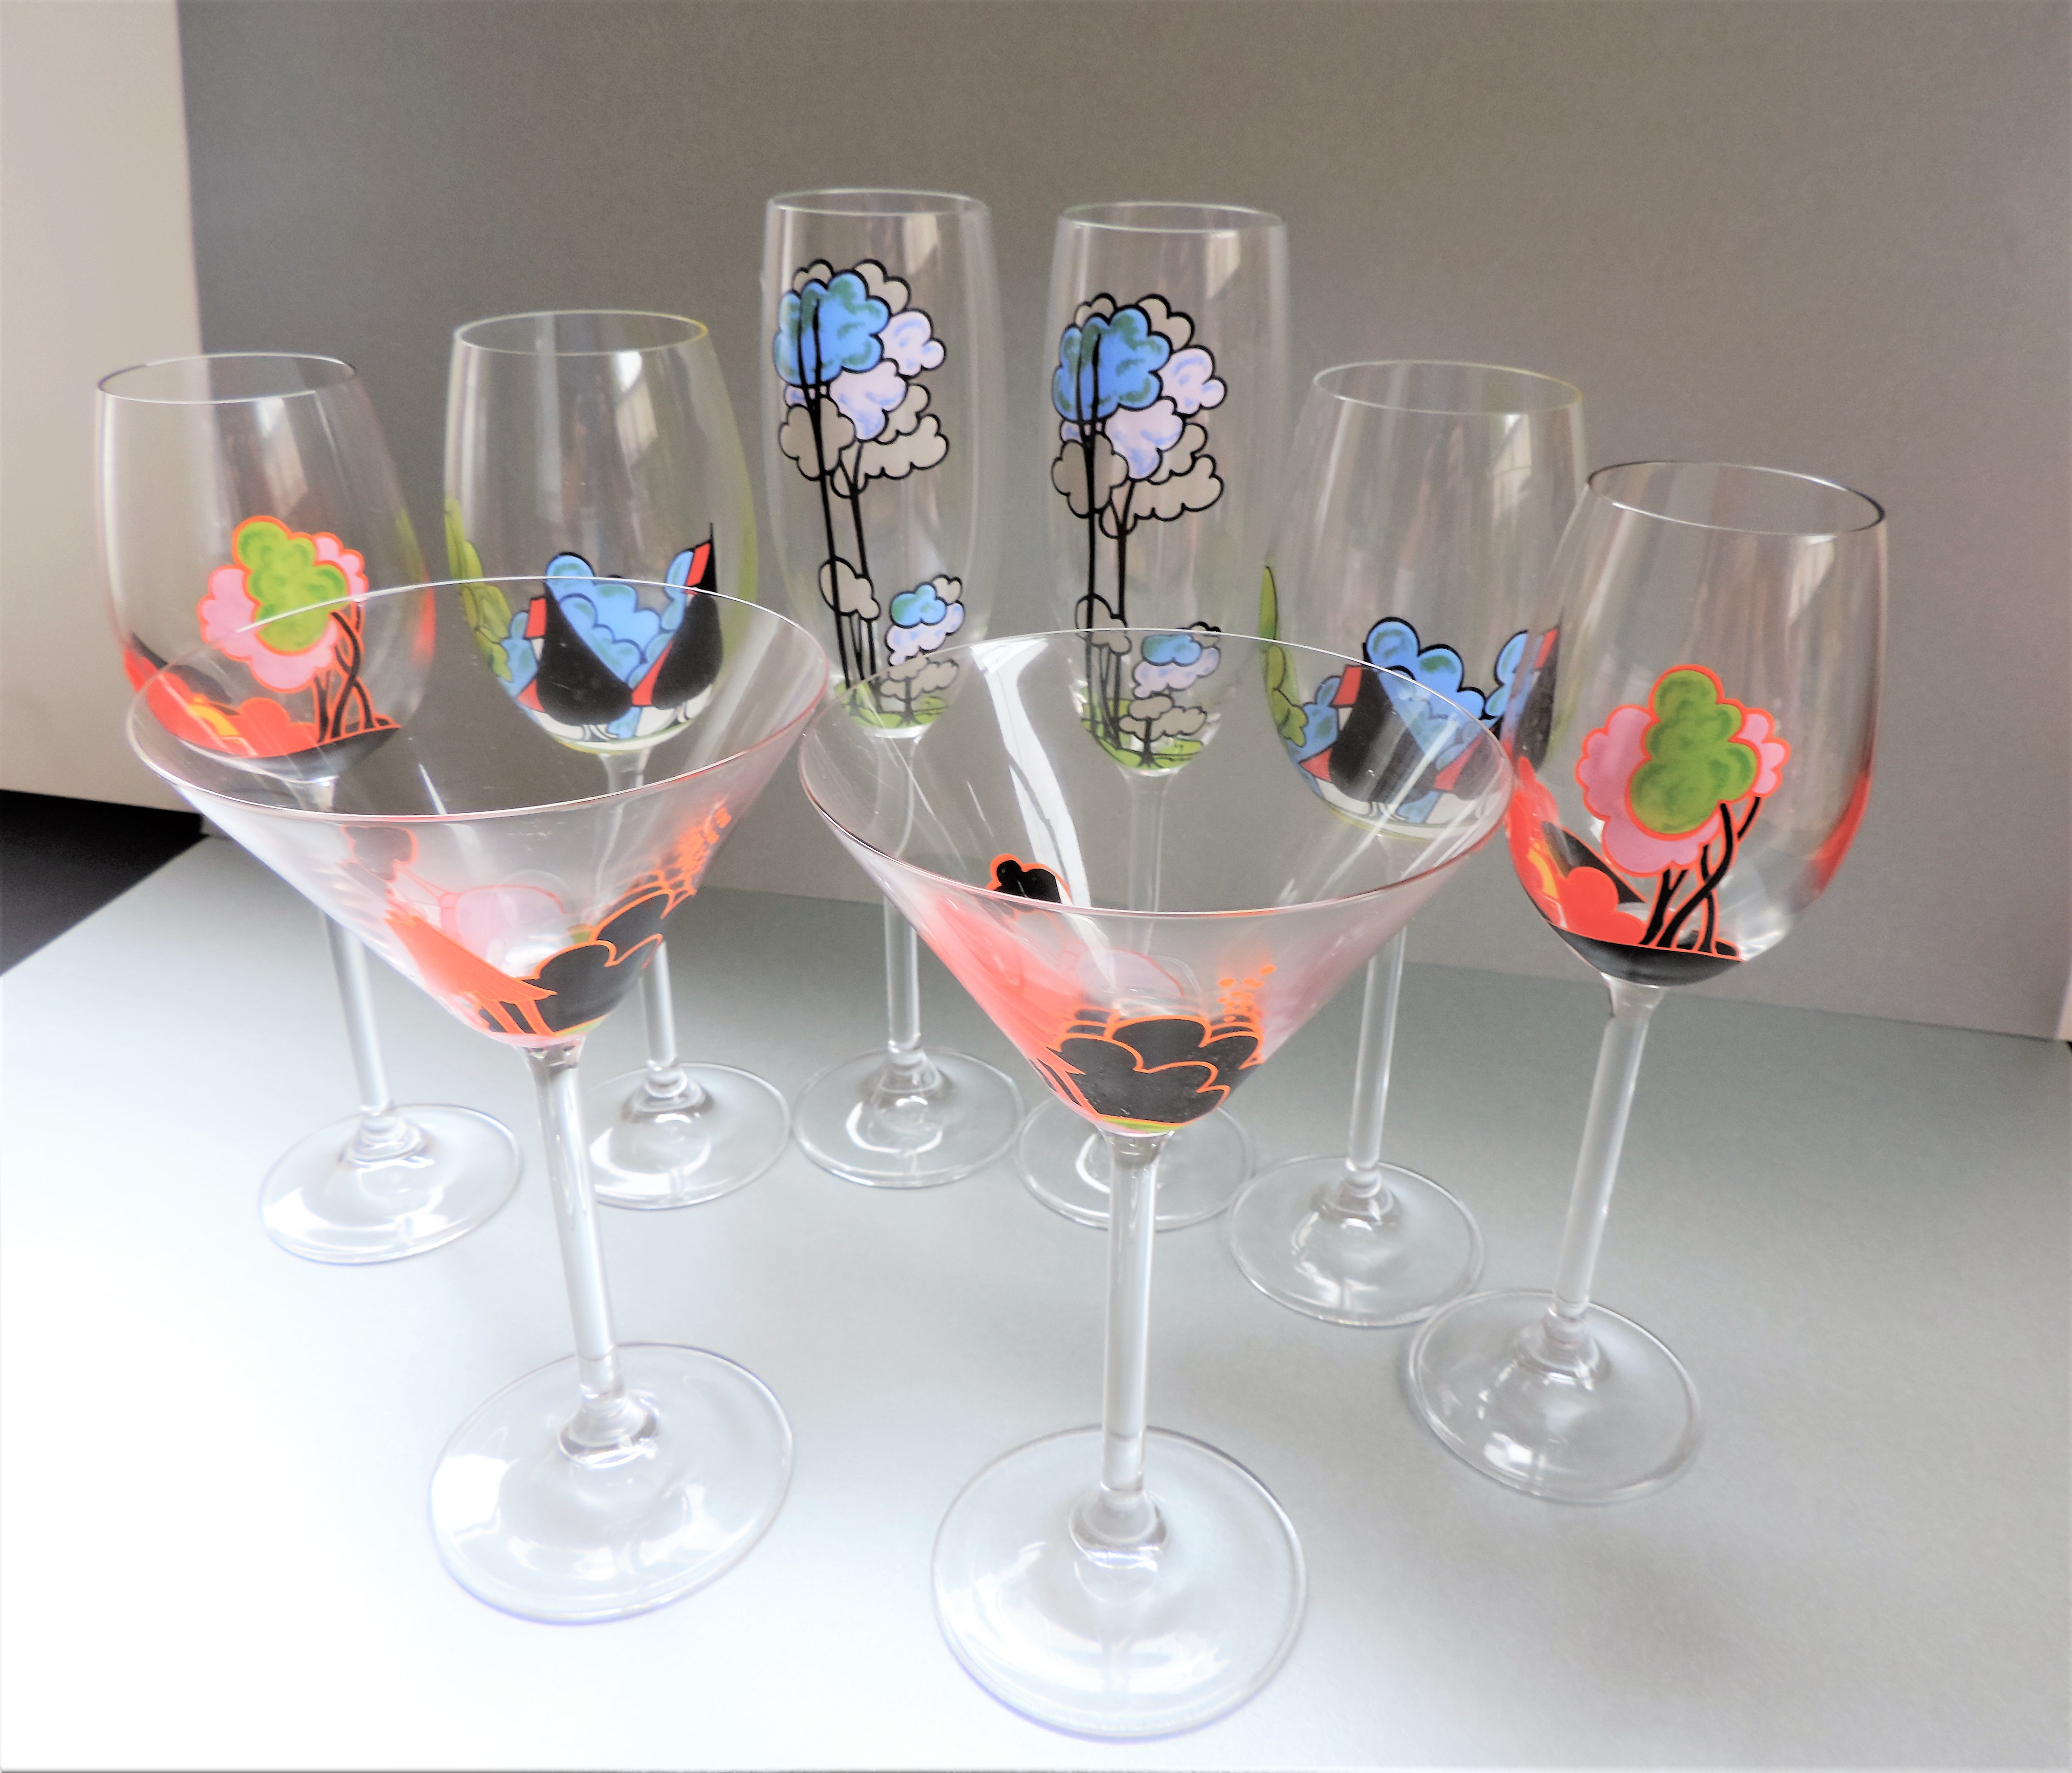 Suite Vintage French Hand Painted Wine & Cocktail Glasses - Image 3 of 5